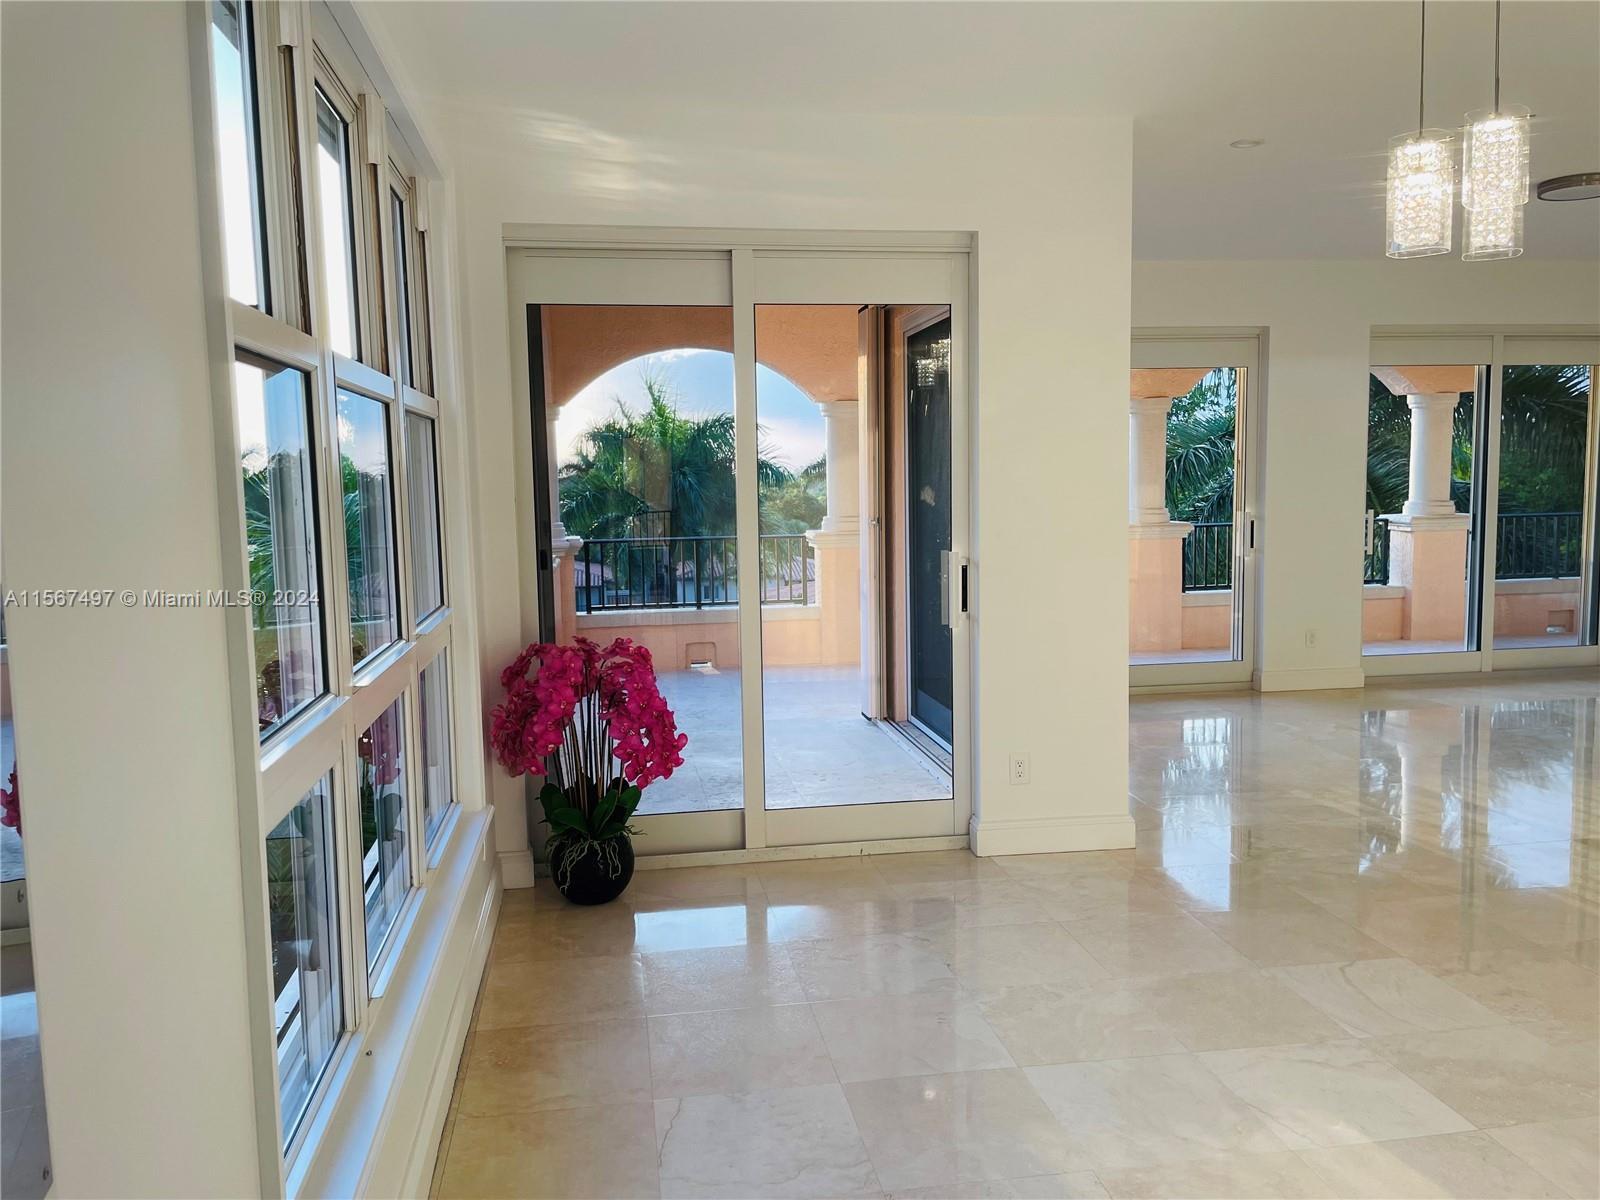 Photo of 13631 Deering Bay Dr #248 in Coral Gables, FL